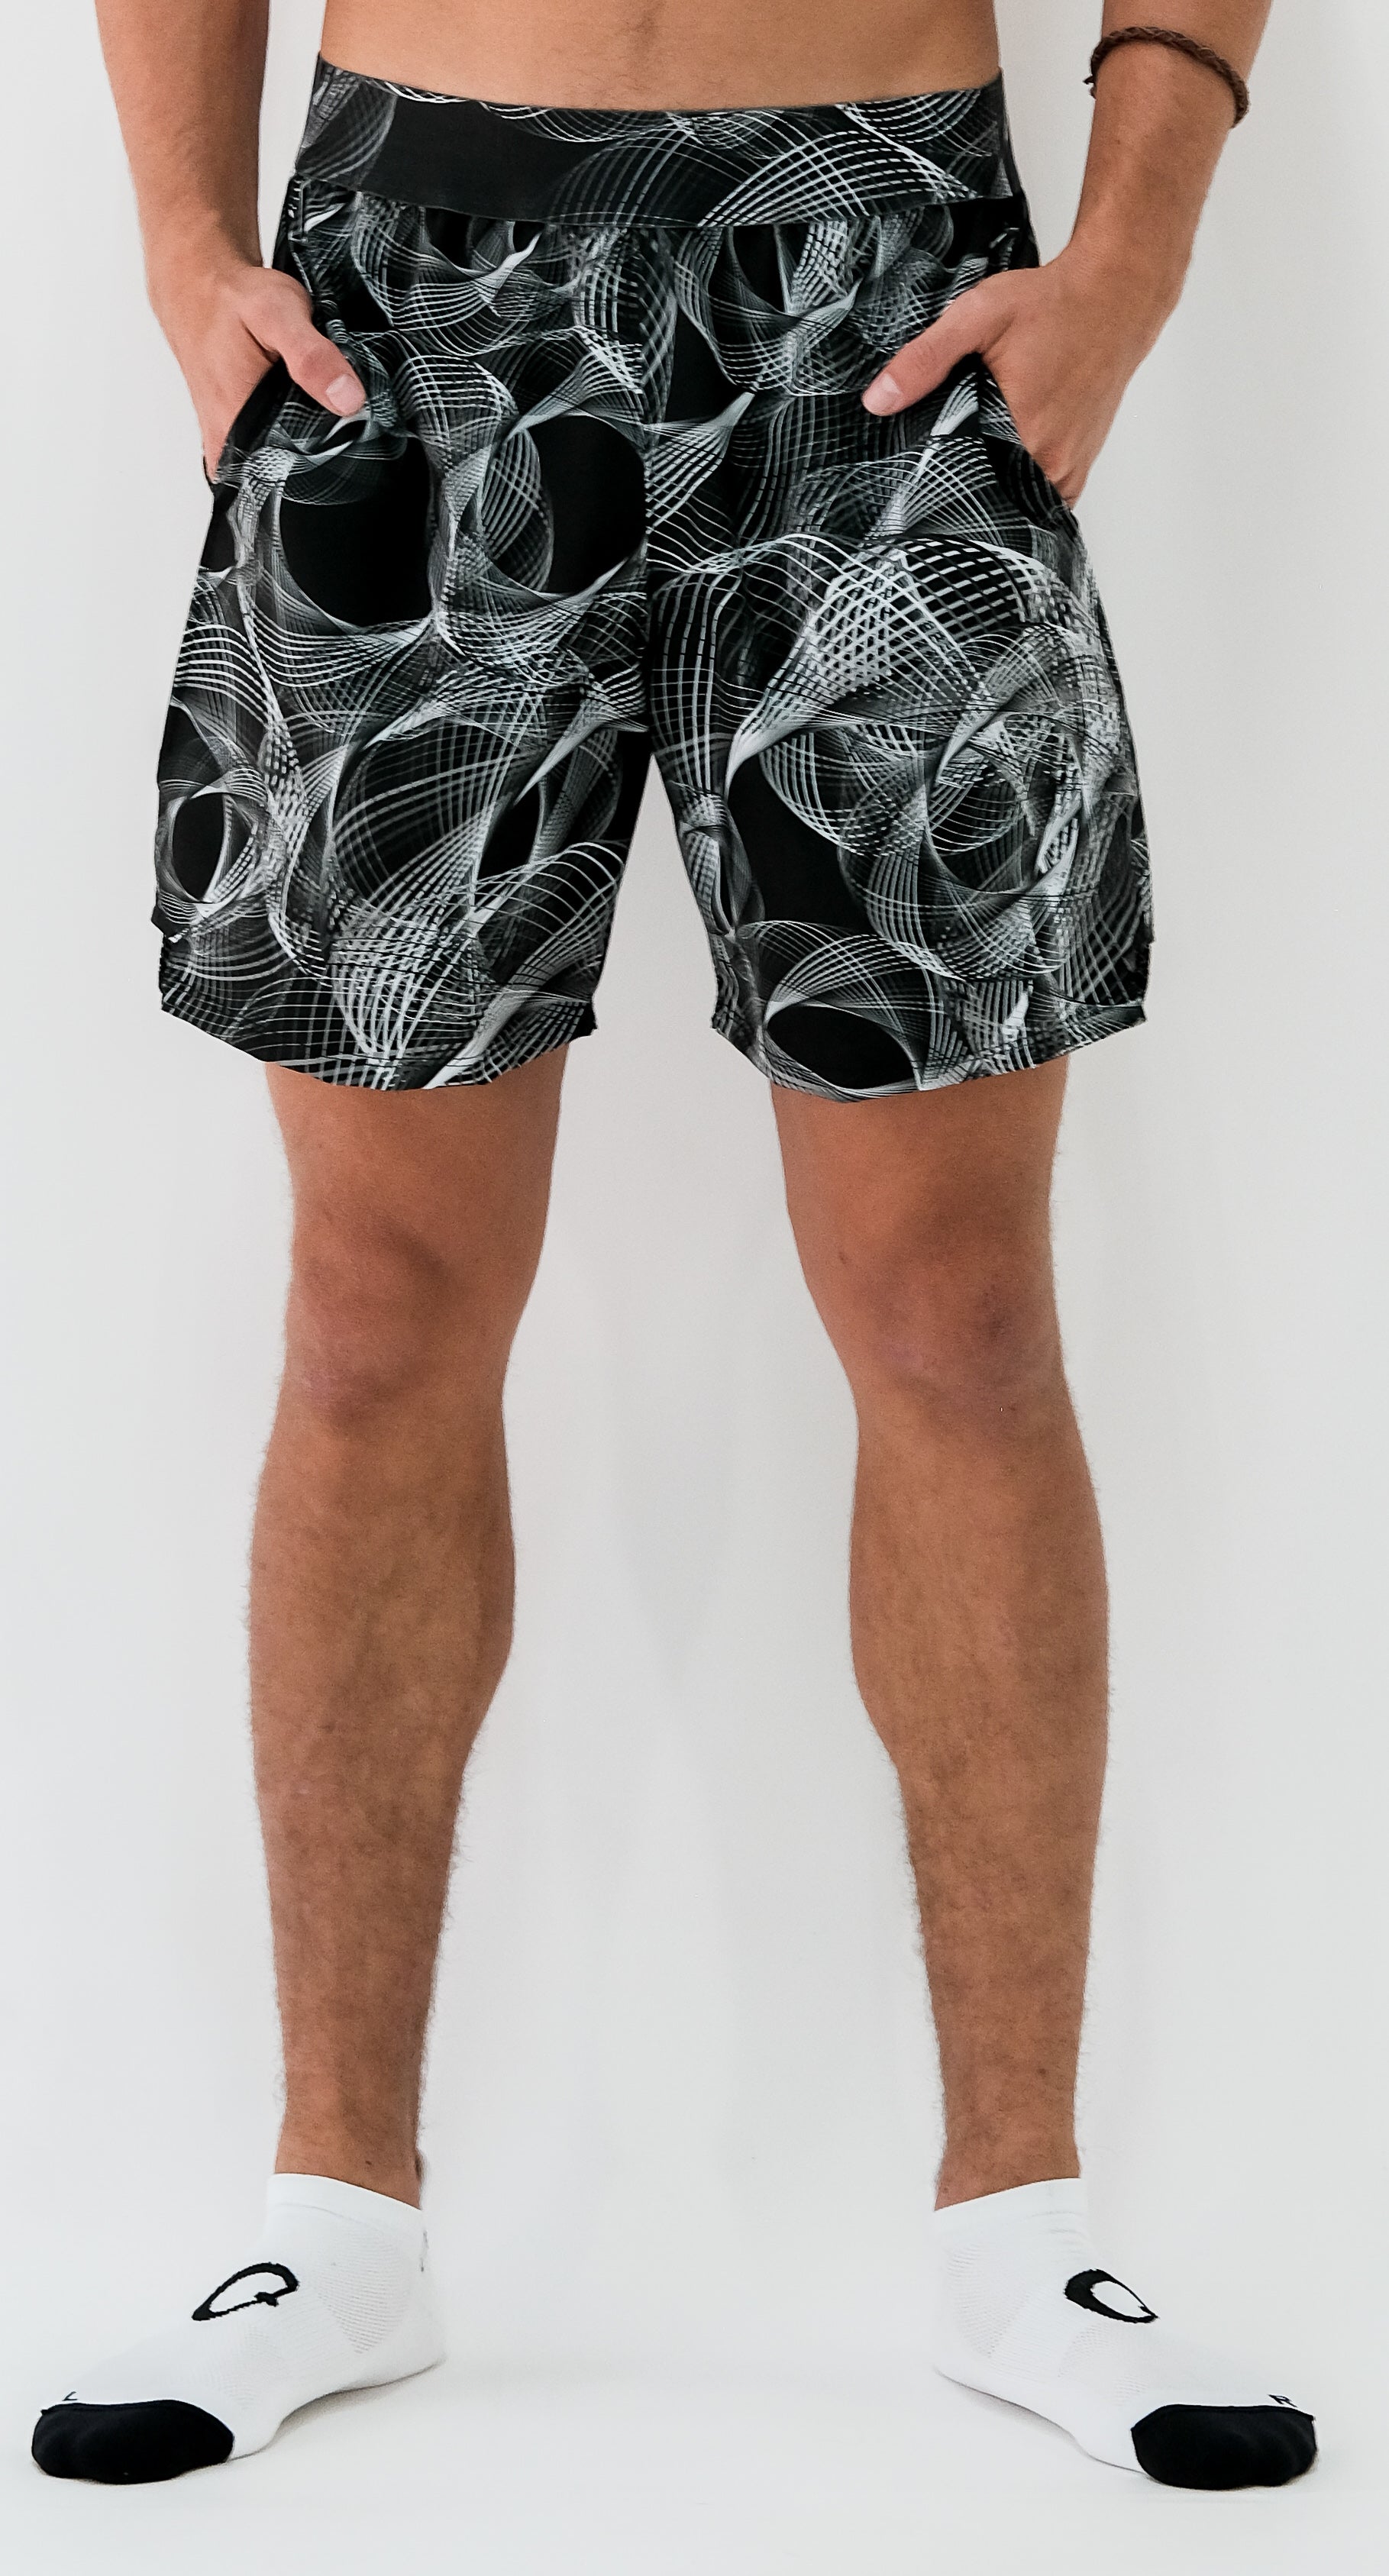 Recycled Vibrations Men's Fitness Short